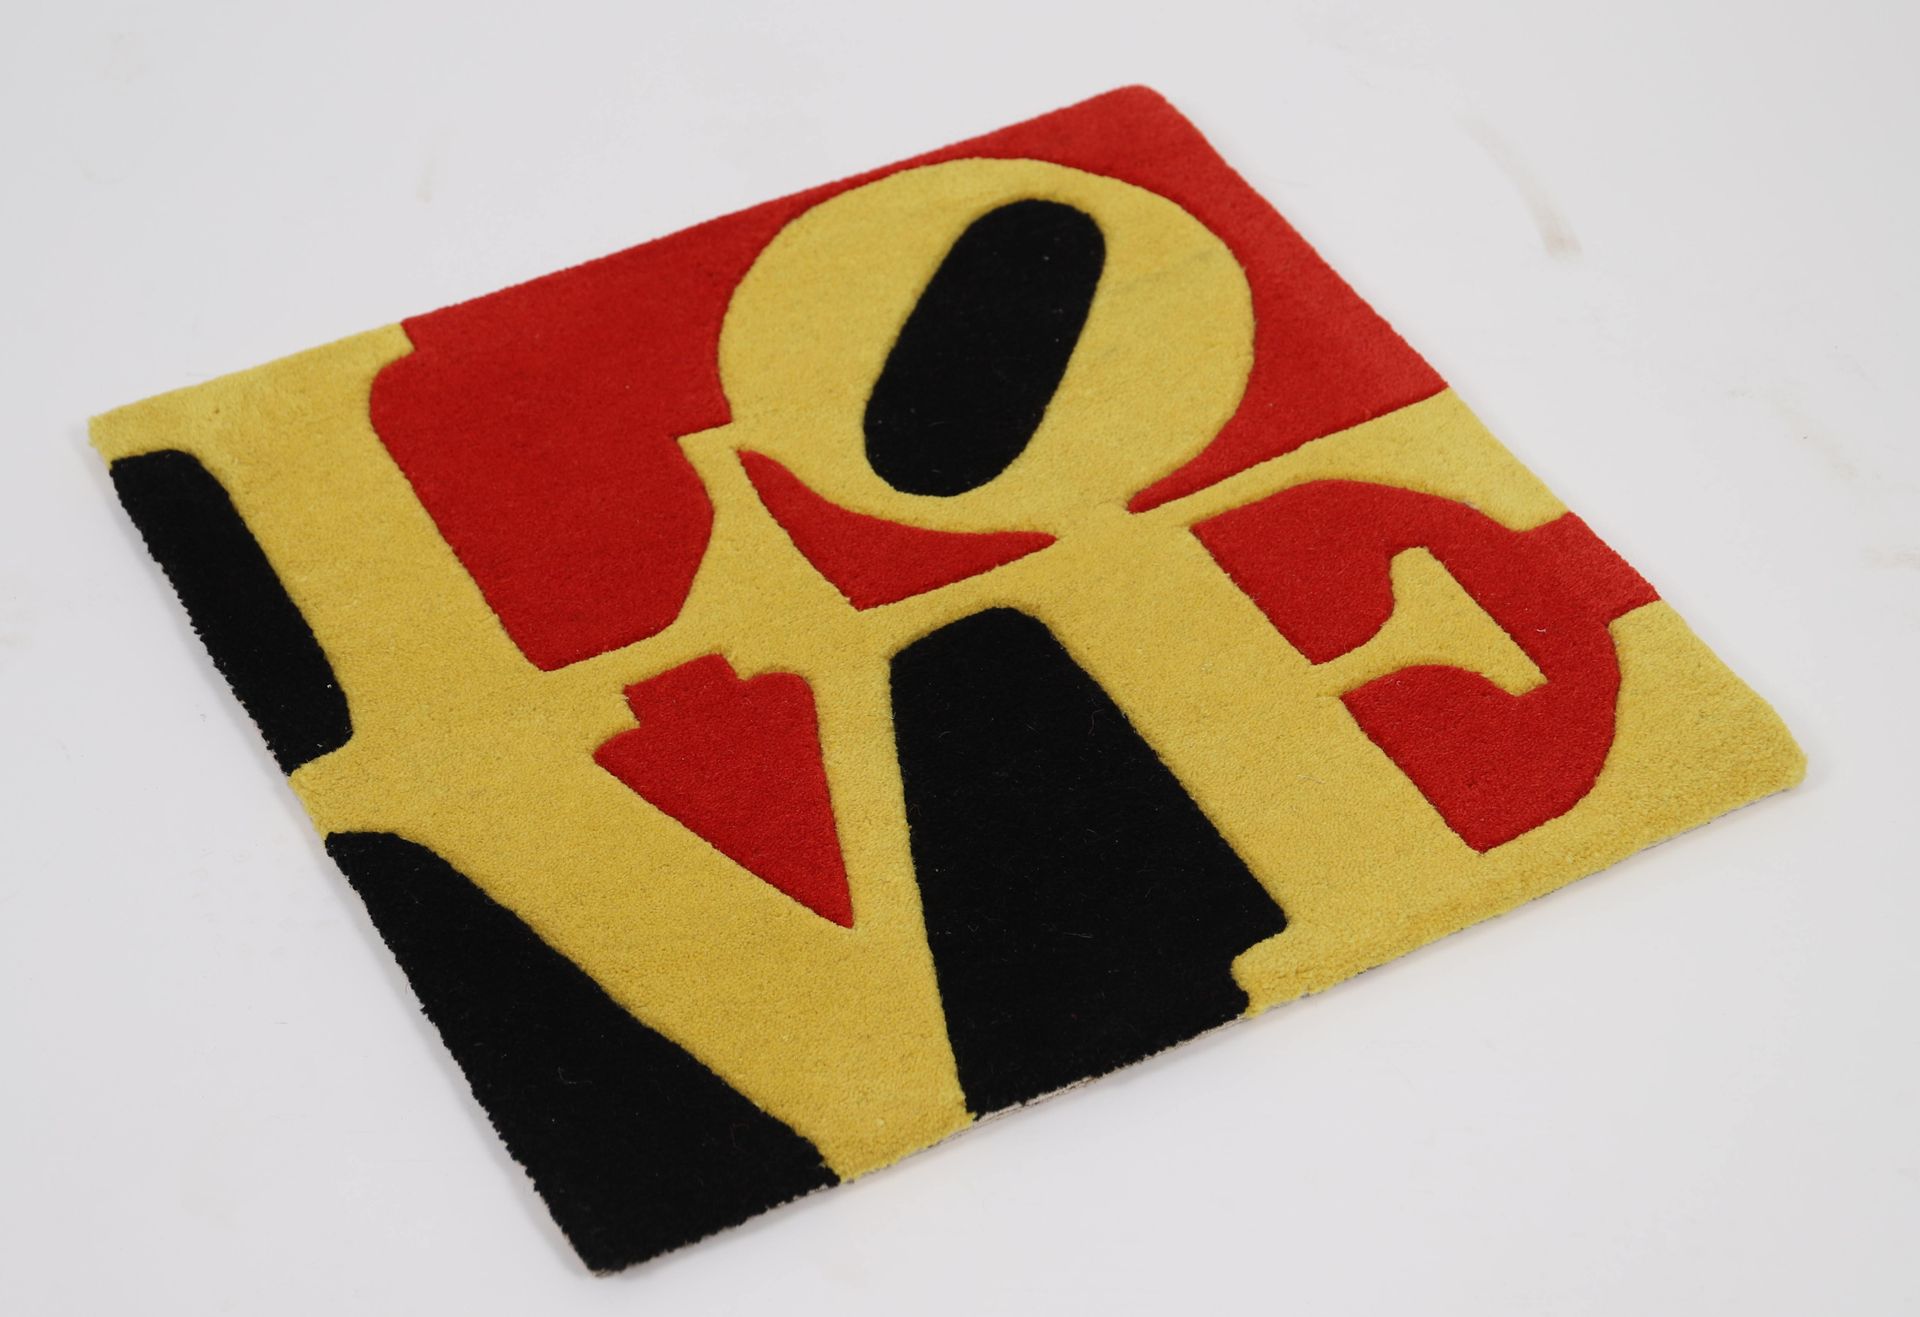 Null After Robert Indiana - "Love" carpet 1964

Numbered 28/999

Edition 2005

D&hellip;